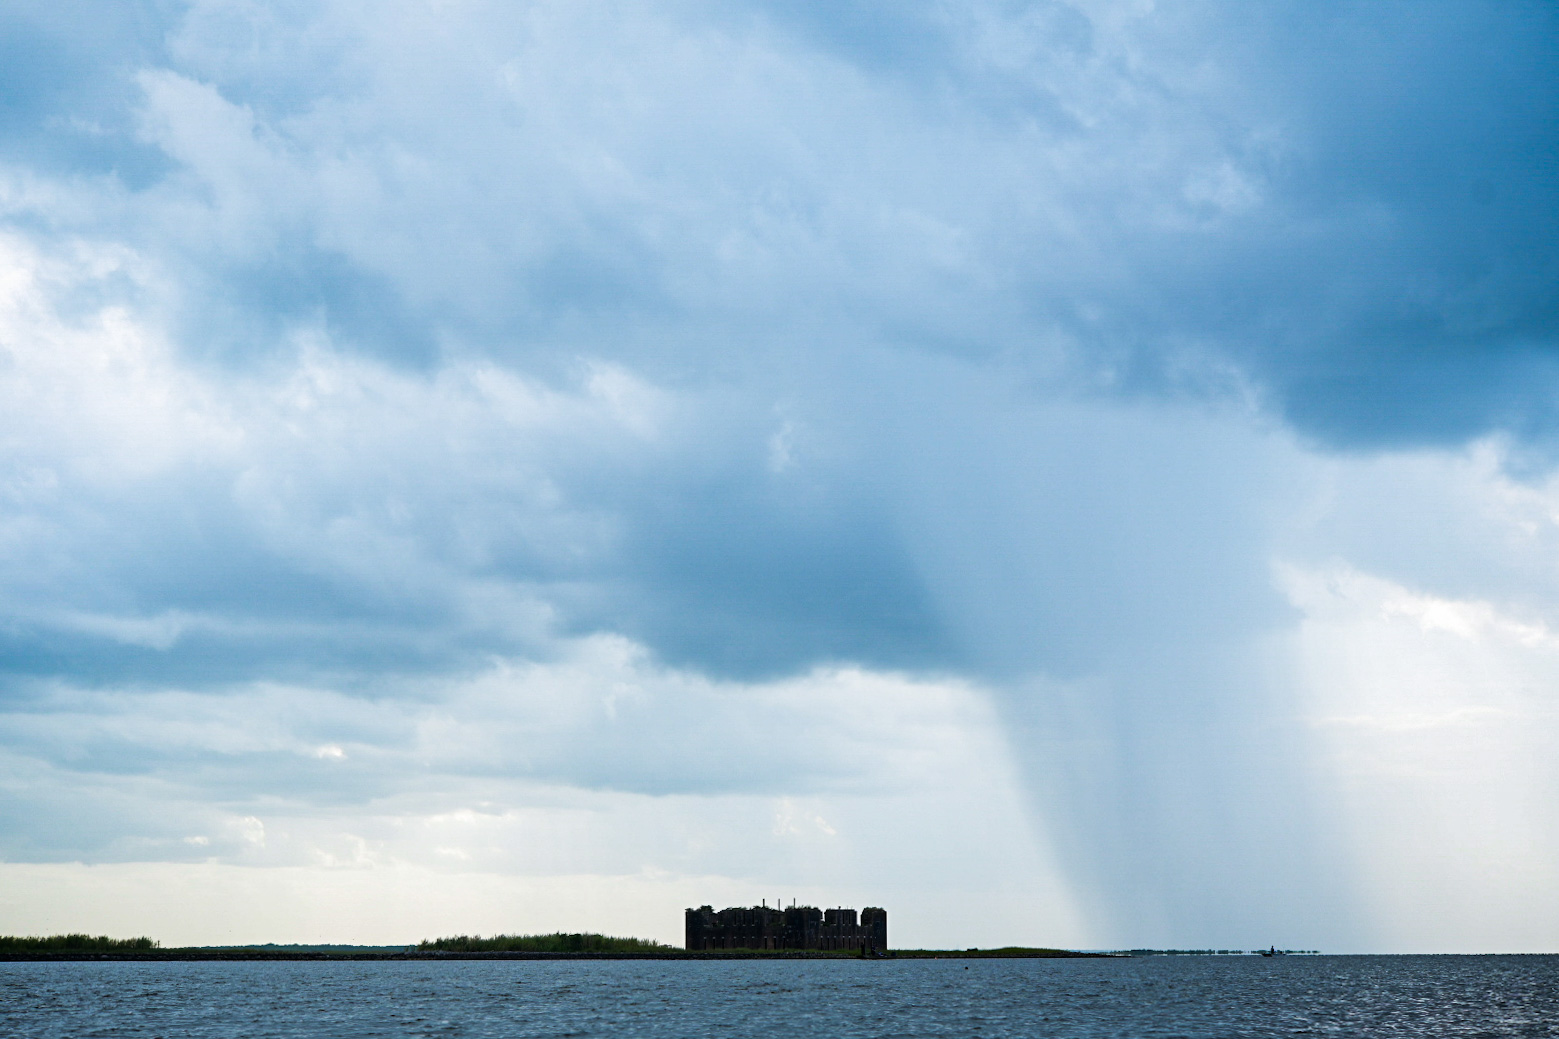 Rain falls as a storm passes over Fort Proctor on Lake Borgne